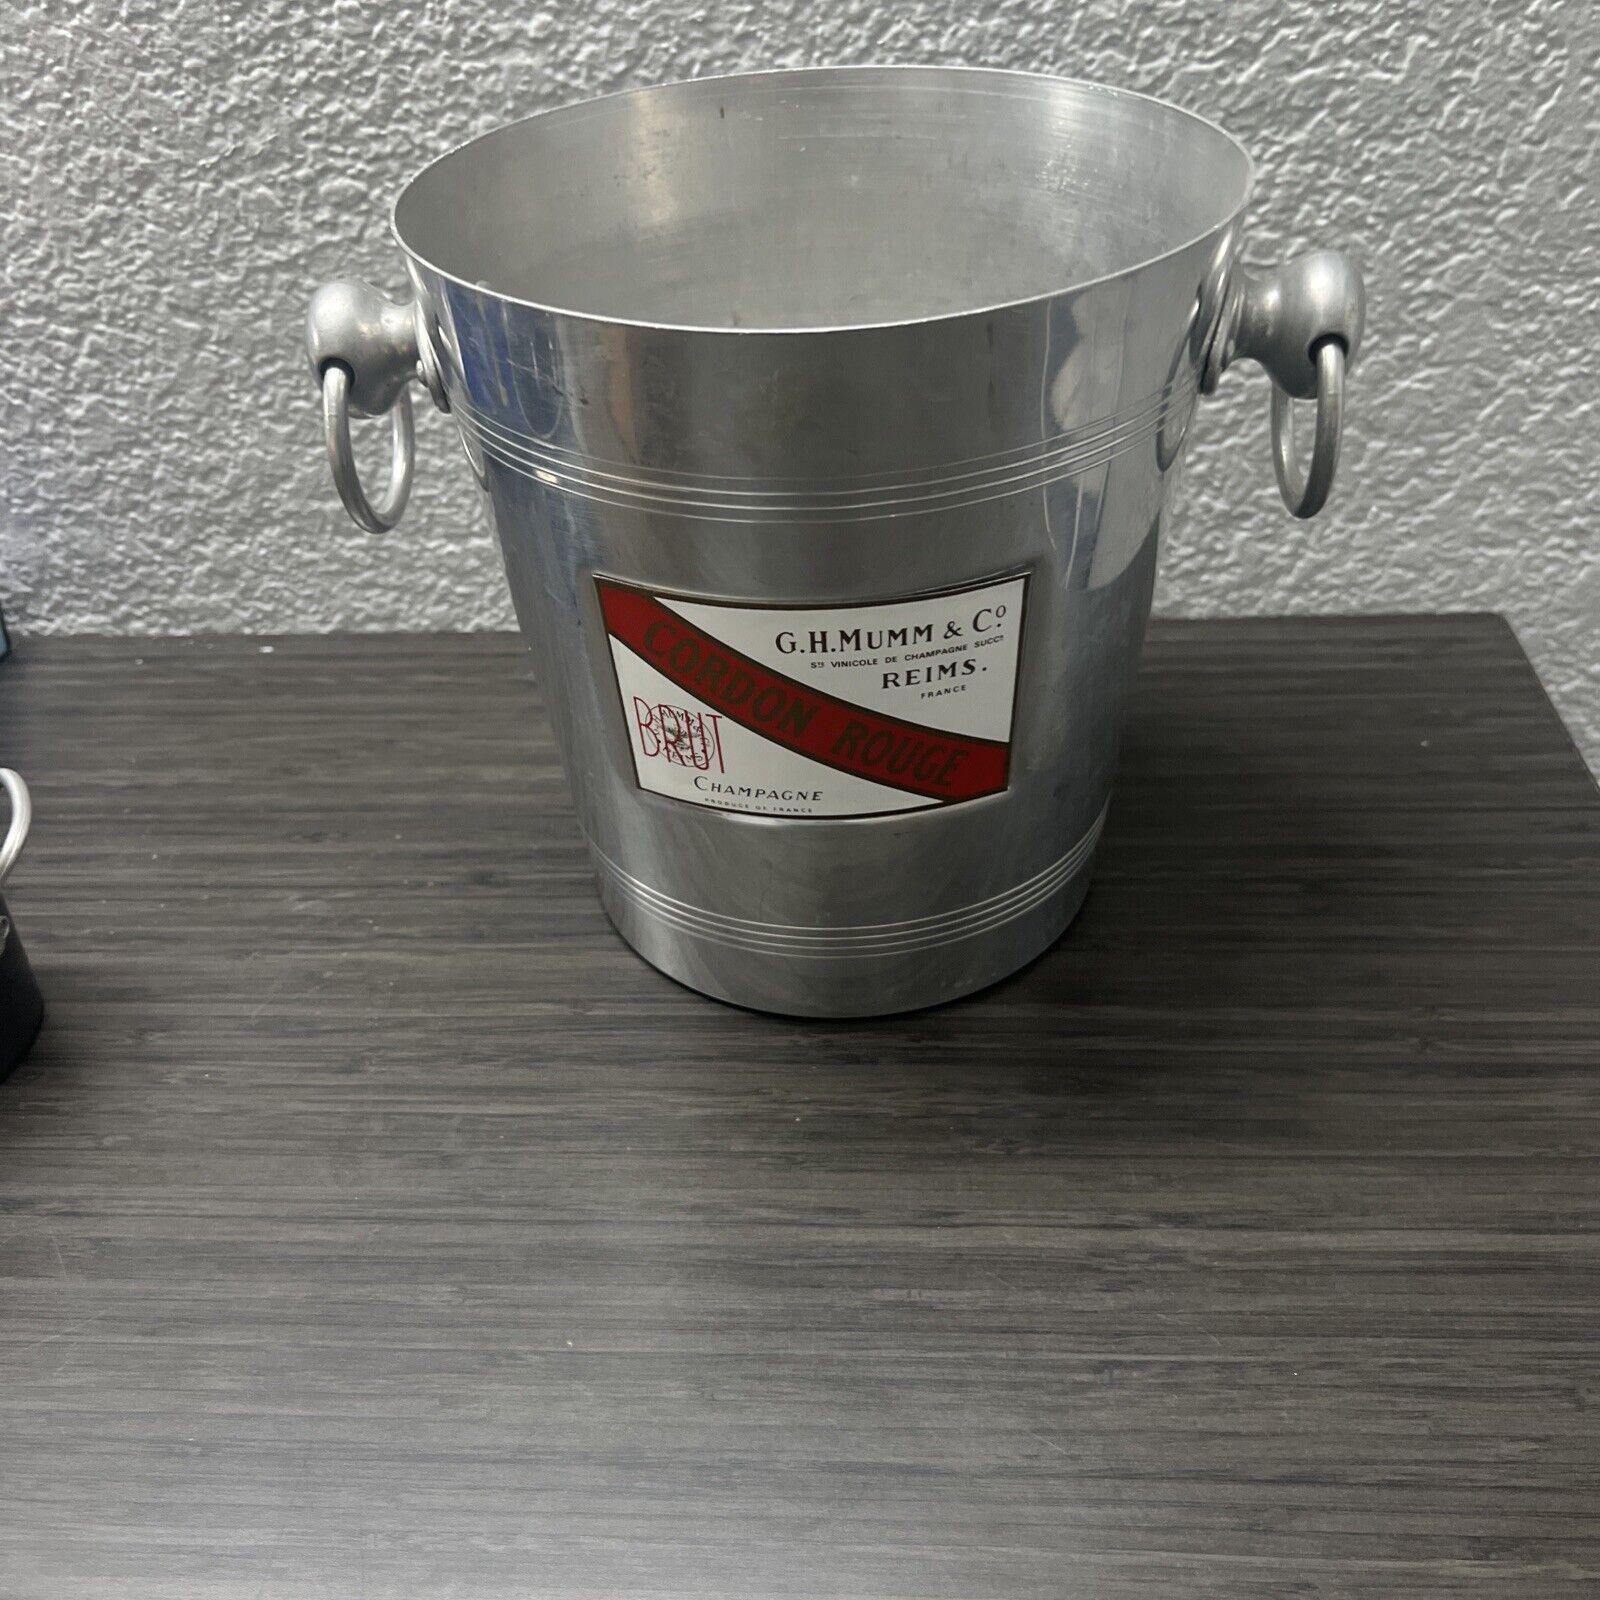 G.H. Mumm  Co Cordon Rouge Champagne Ice Bucket, Reims France